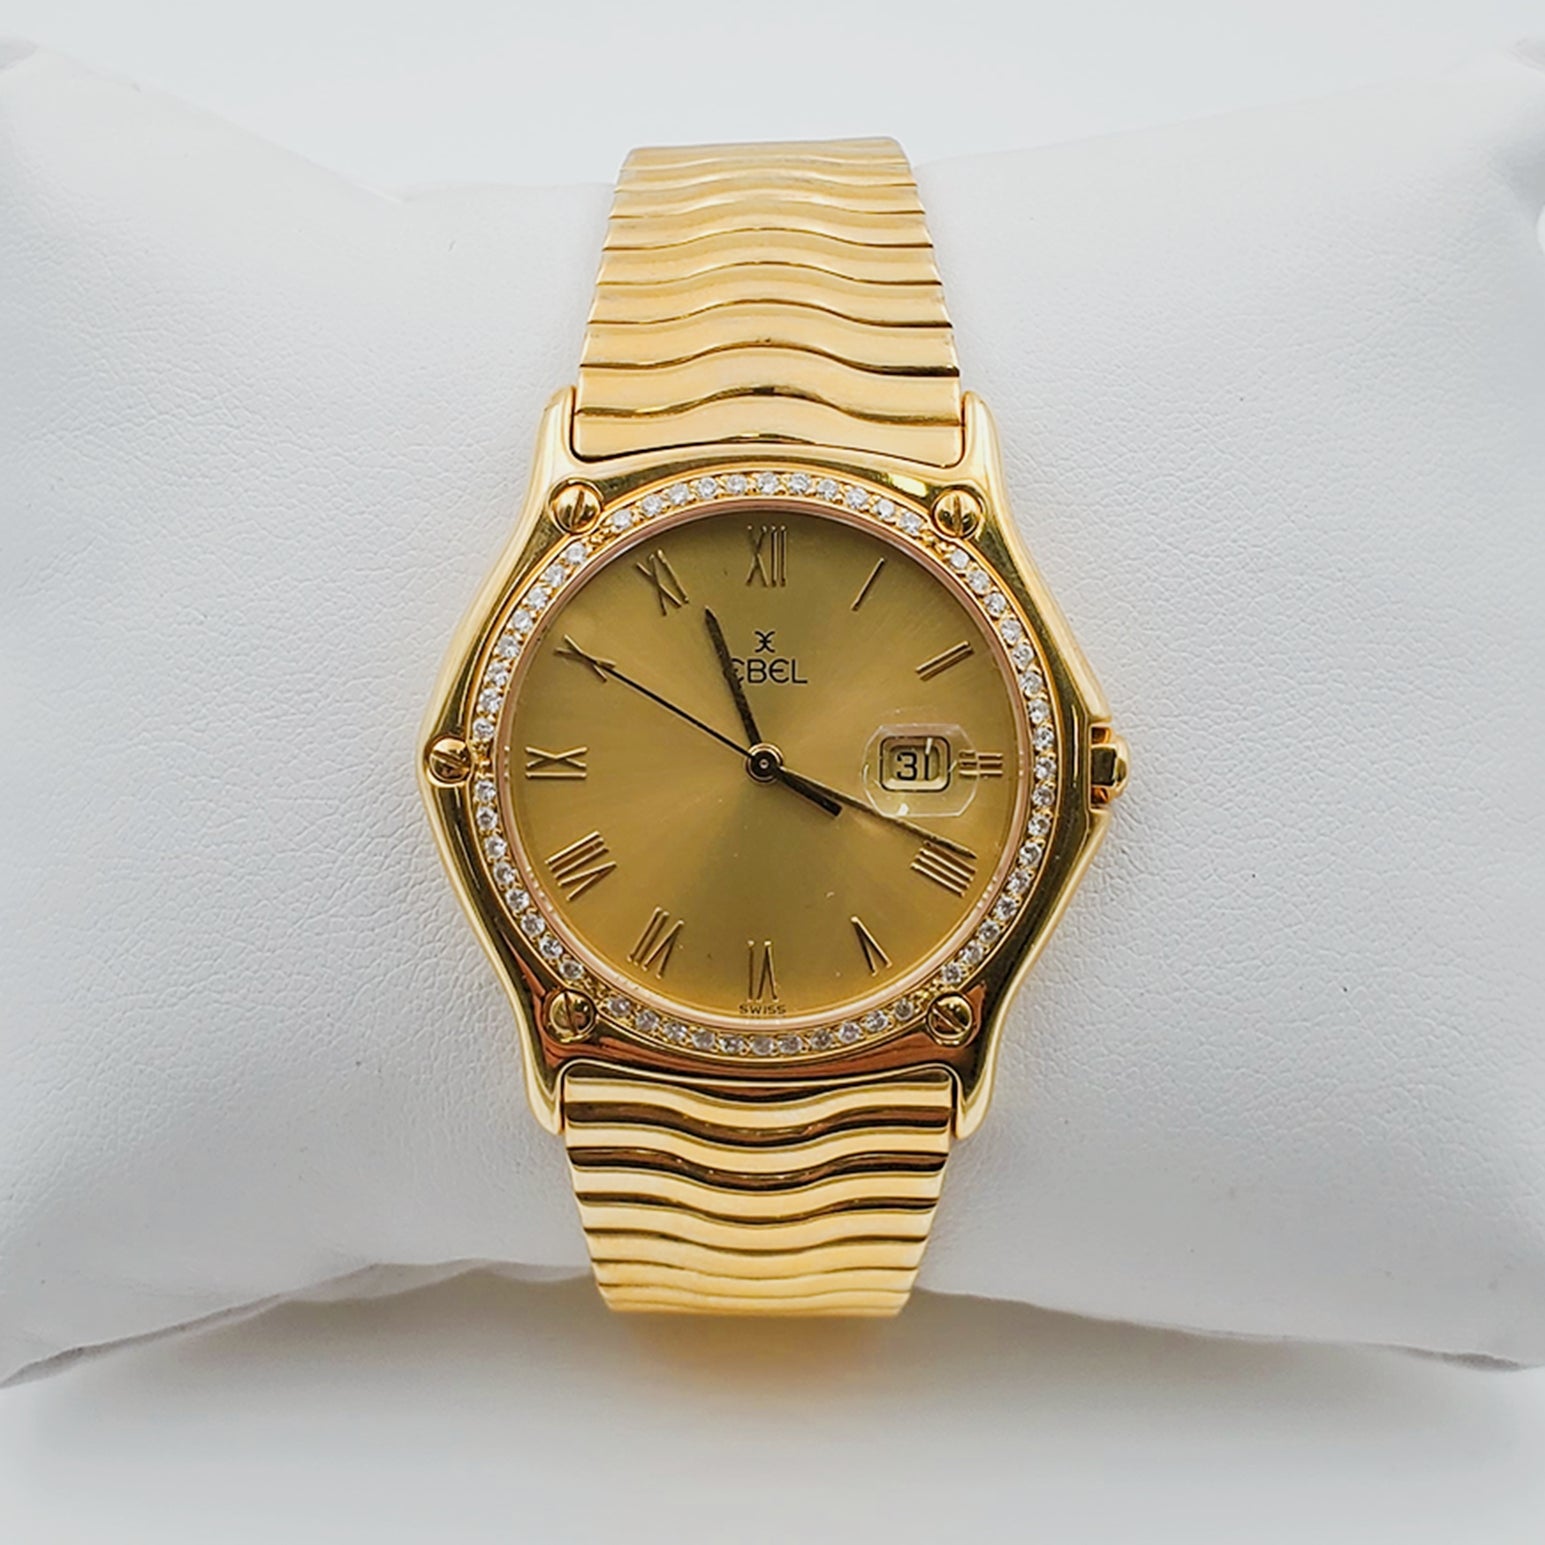 Men's Ebel 36mm Solid 18K Yellow Gold Band Watch with Champagne Dial and Diamond Bezel. (Pre-Owned)